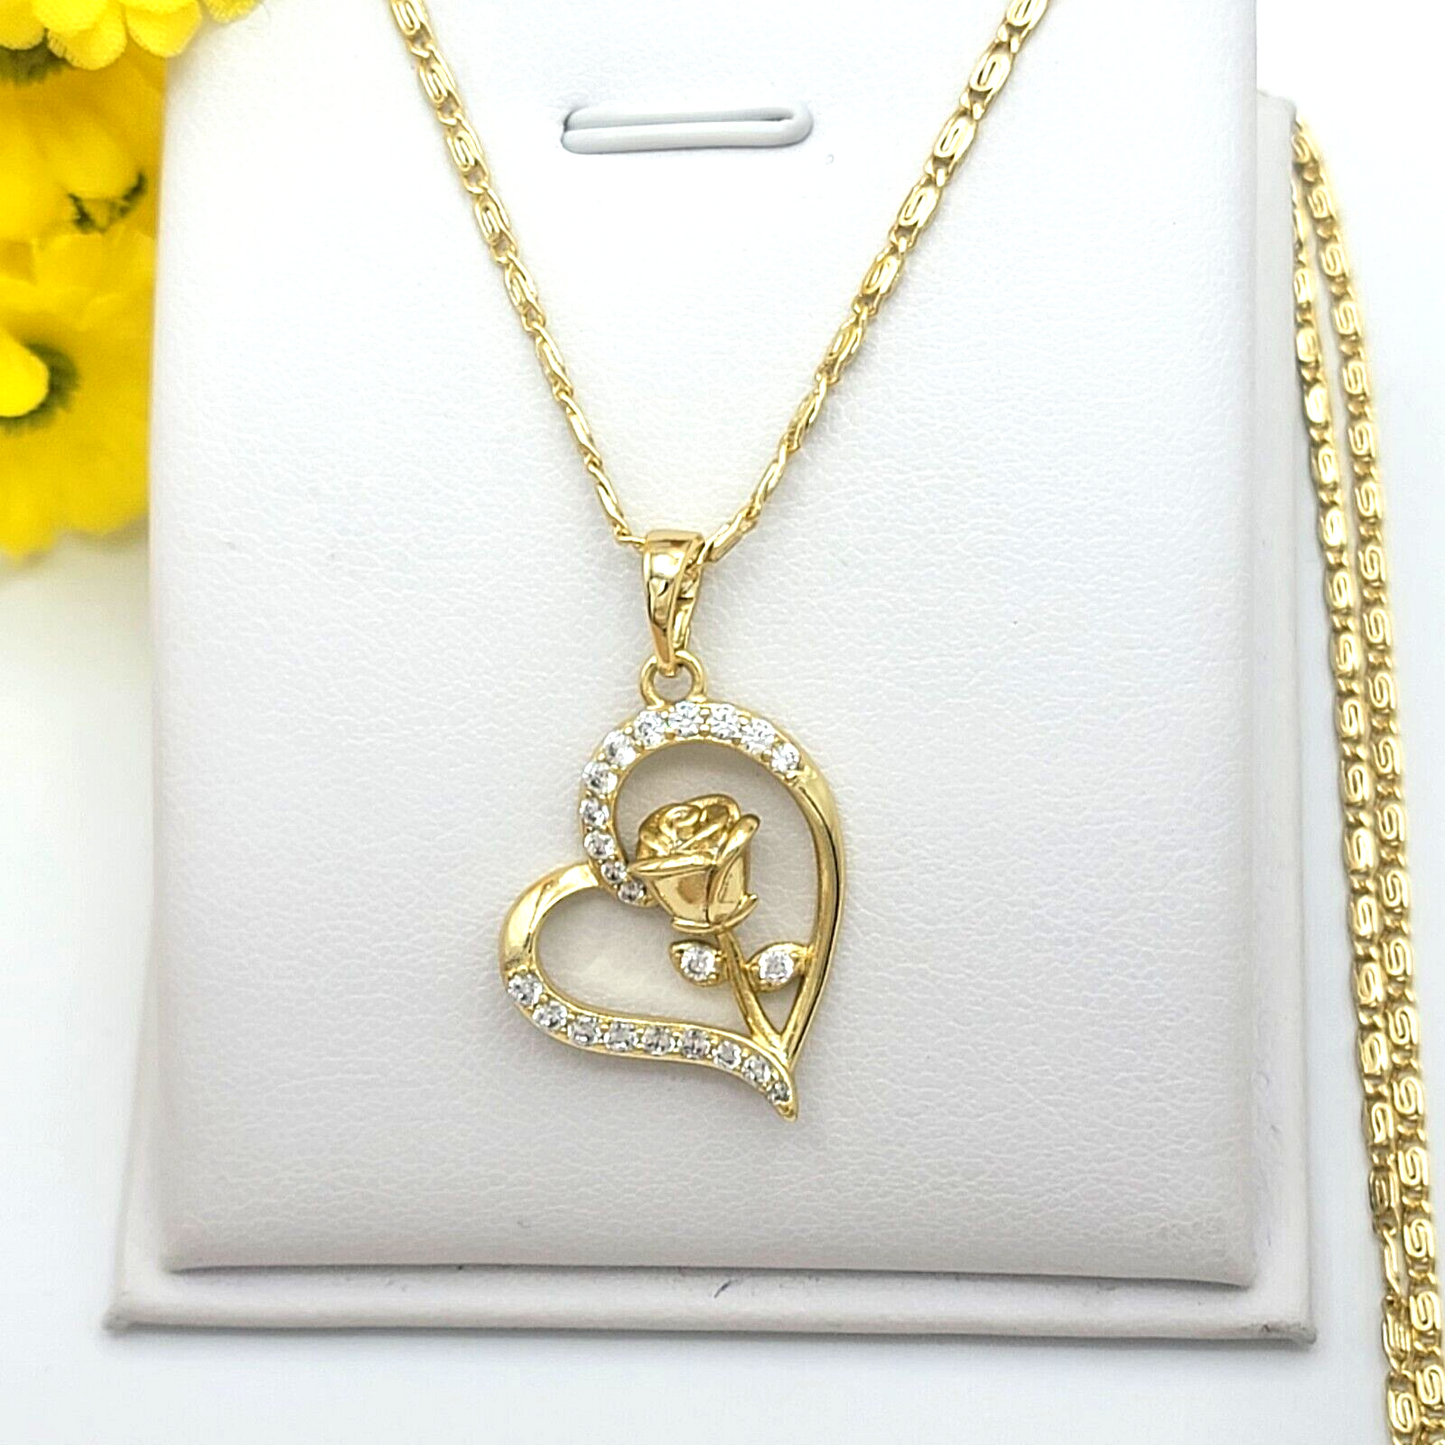 Necklaces - 14K Gold Plated. Rose Flower Heart.